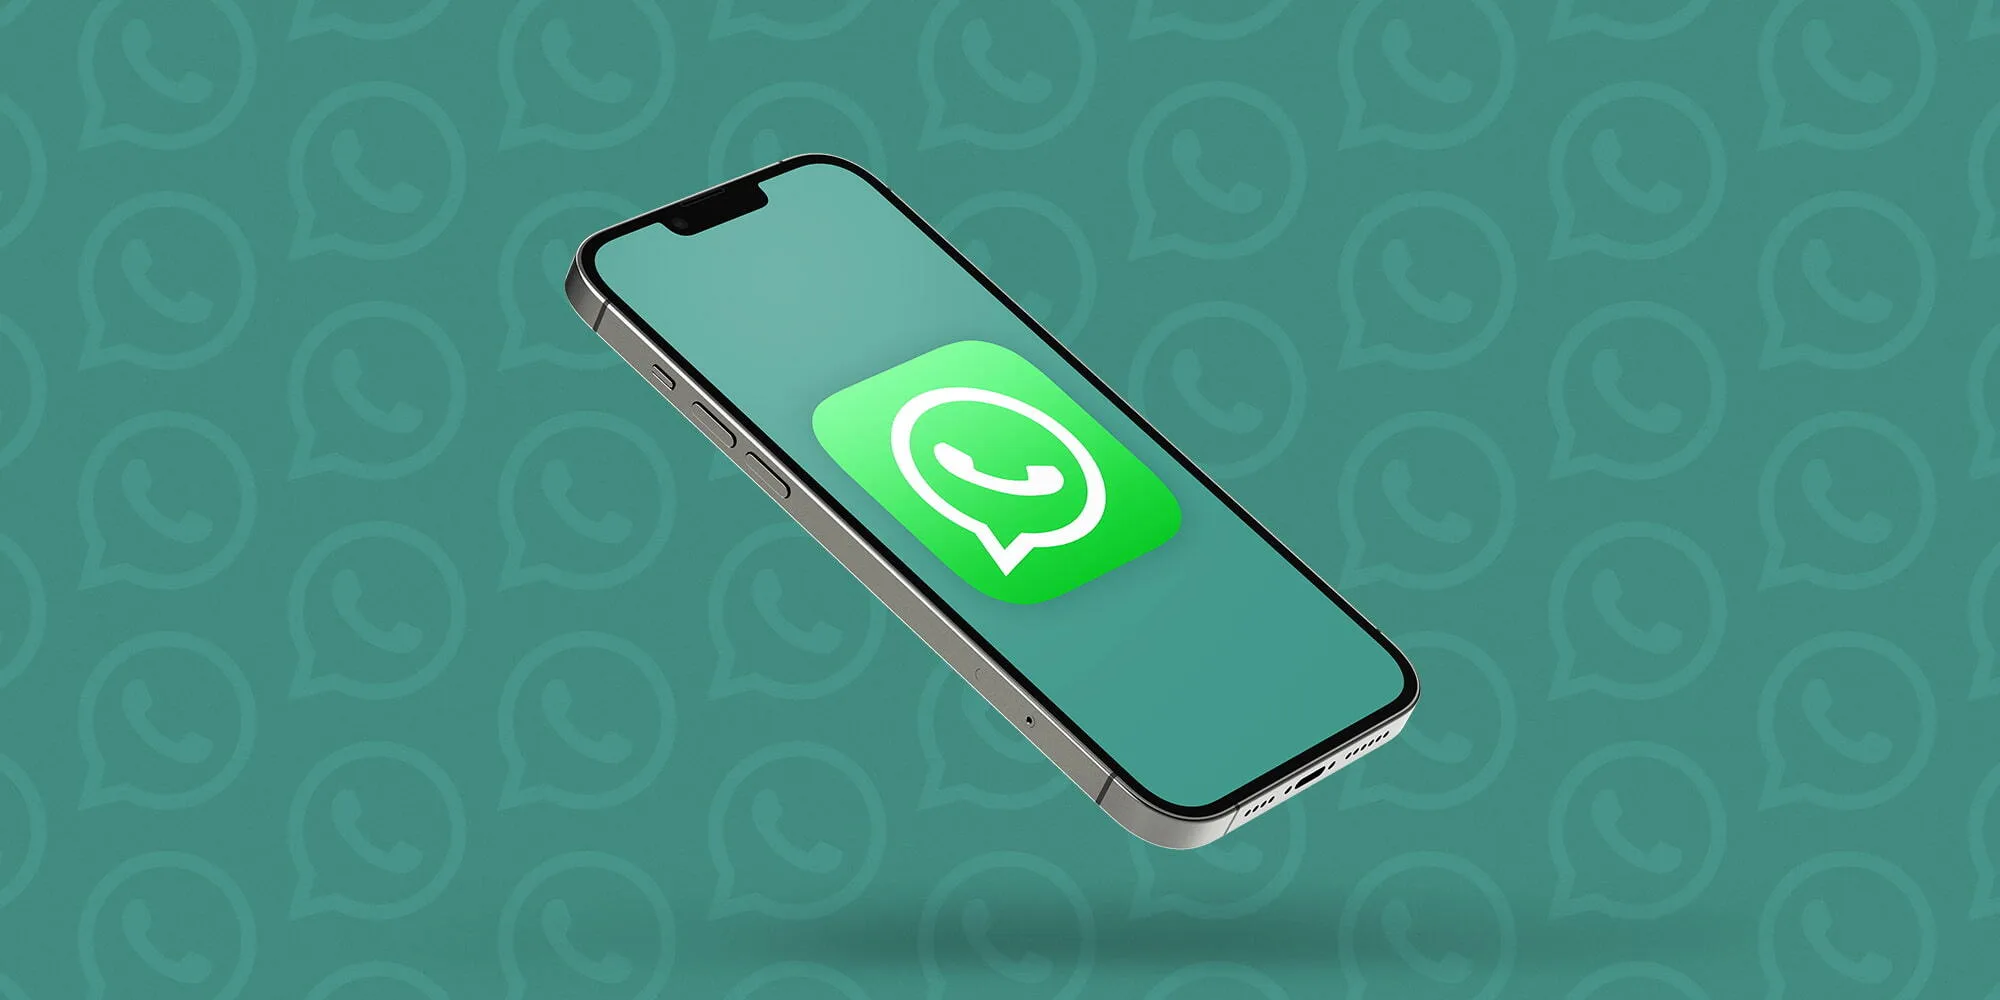 How Financial Support Helped WhatsApp